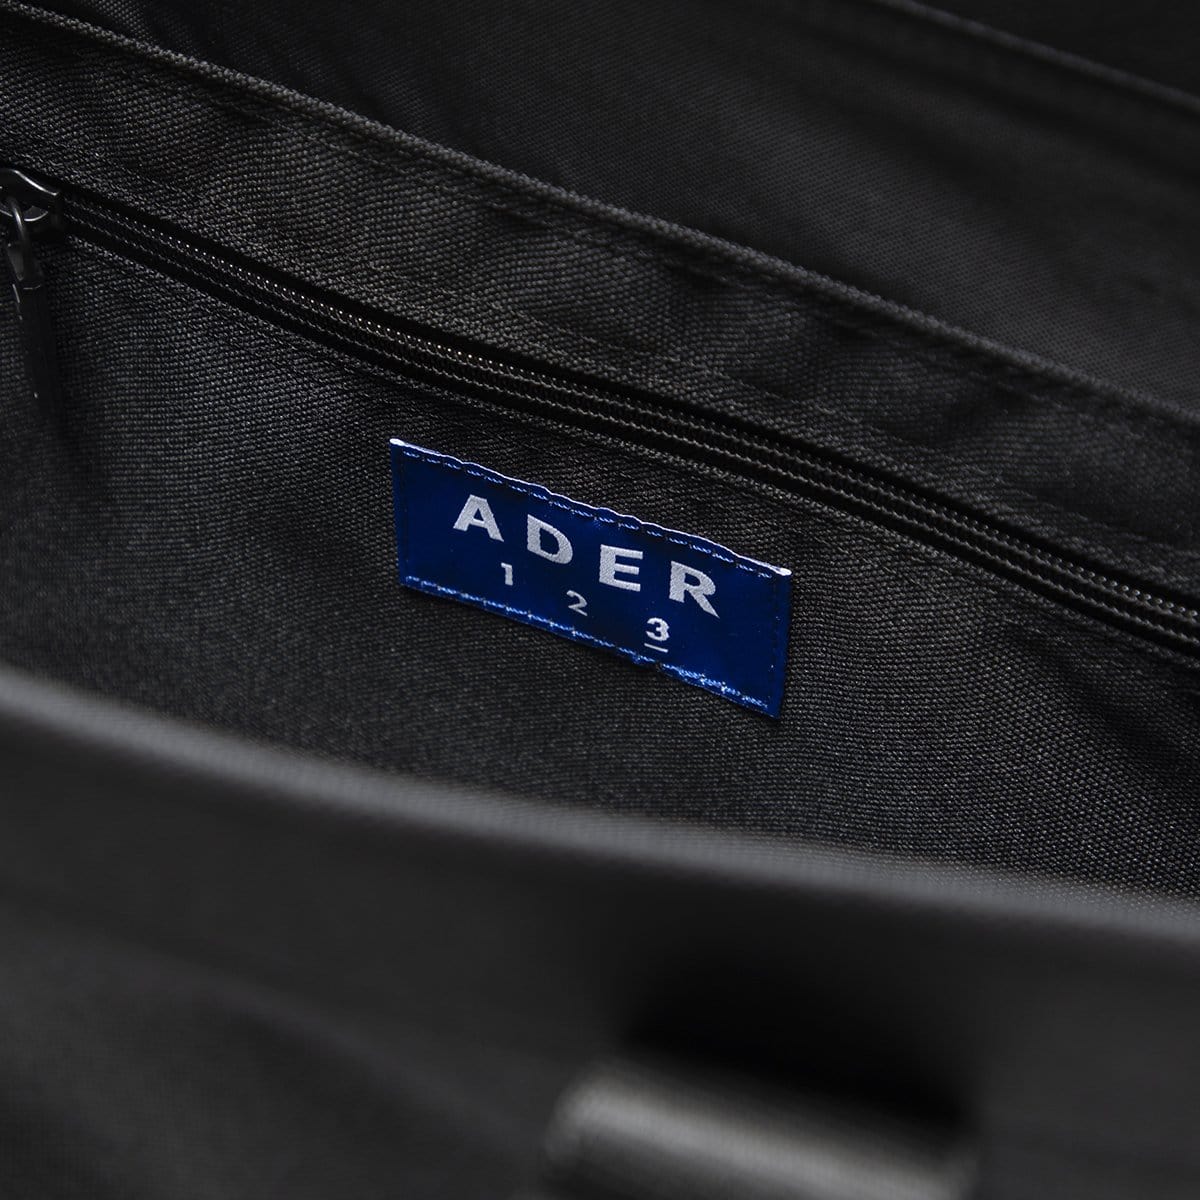 Ader Error Bags & Accessories BLACK / O/S LARGE SHOPPING BAG